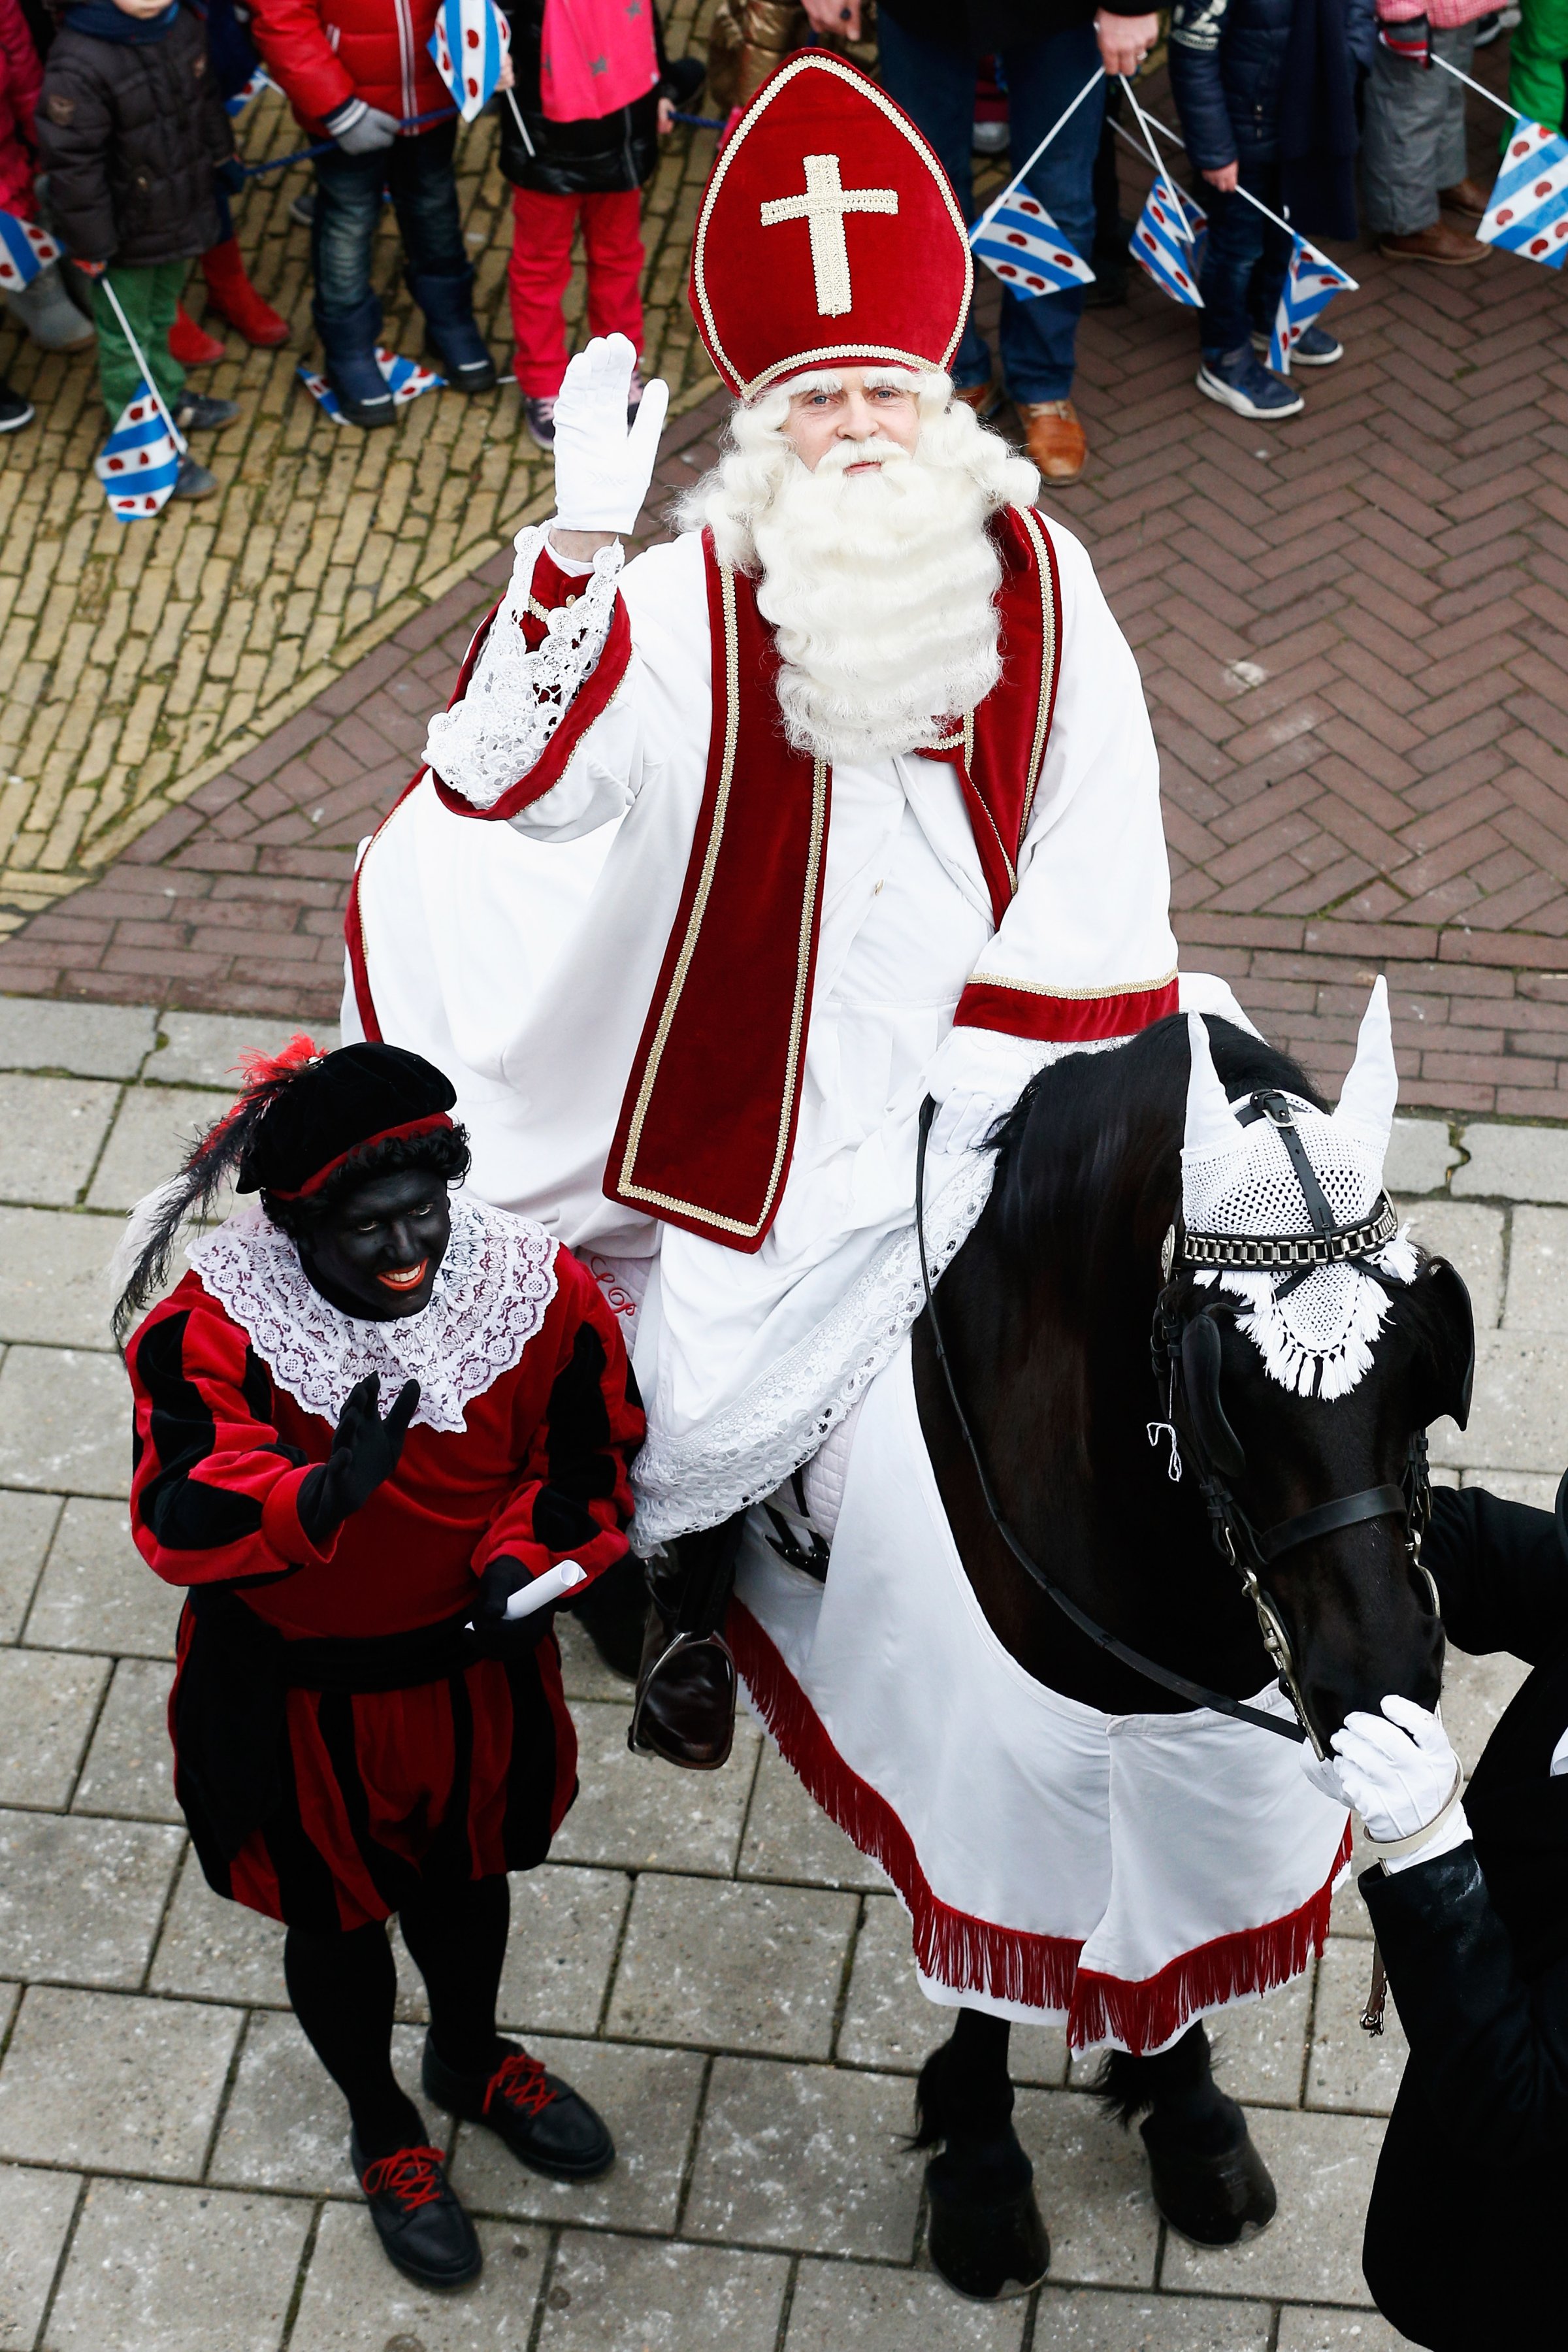 People line the streets near the pier as Sint Piter, named after the patron saint of fishermen Saint Peter, and Zwarte Piet (or Black Pete) arrive on February 14, 2015 in Grou, Netherlands.